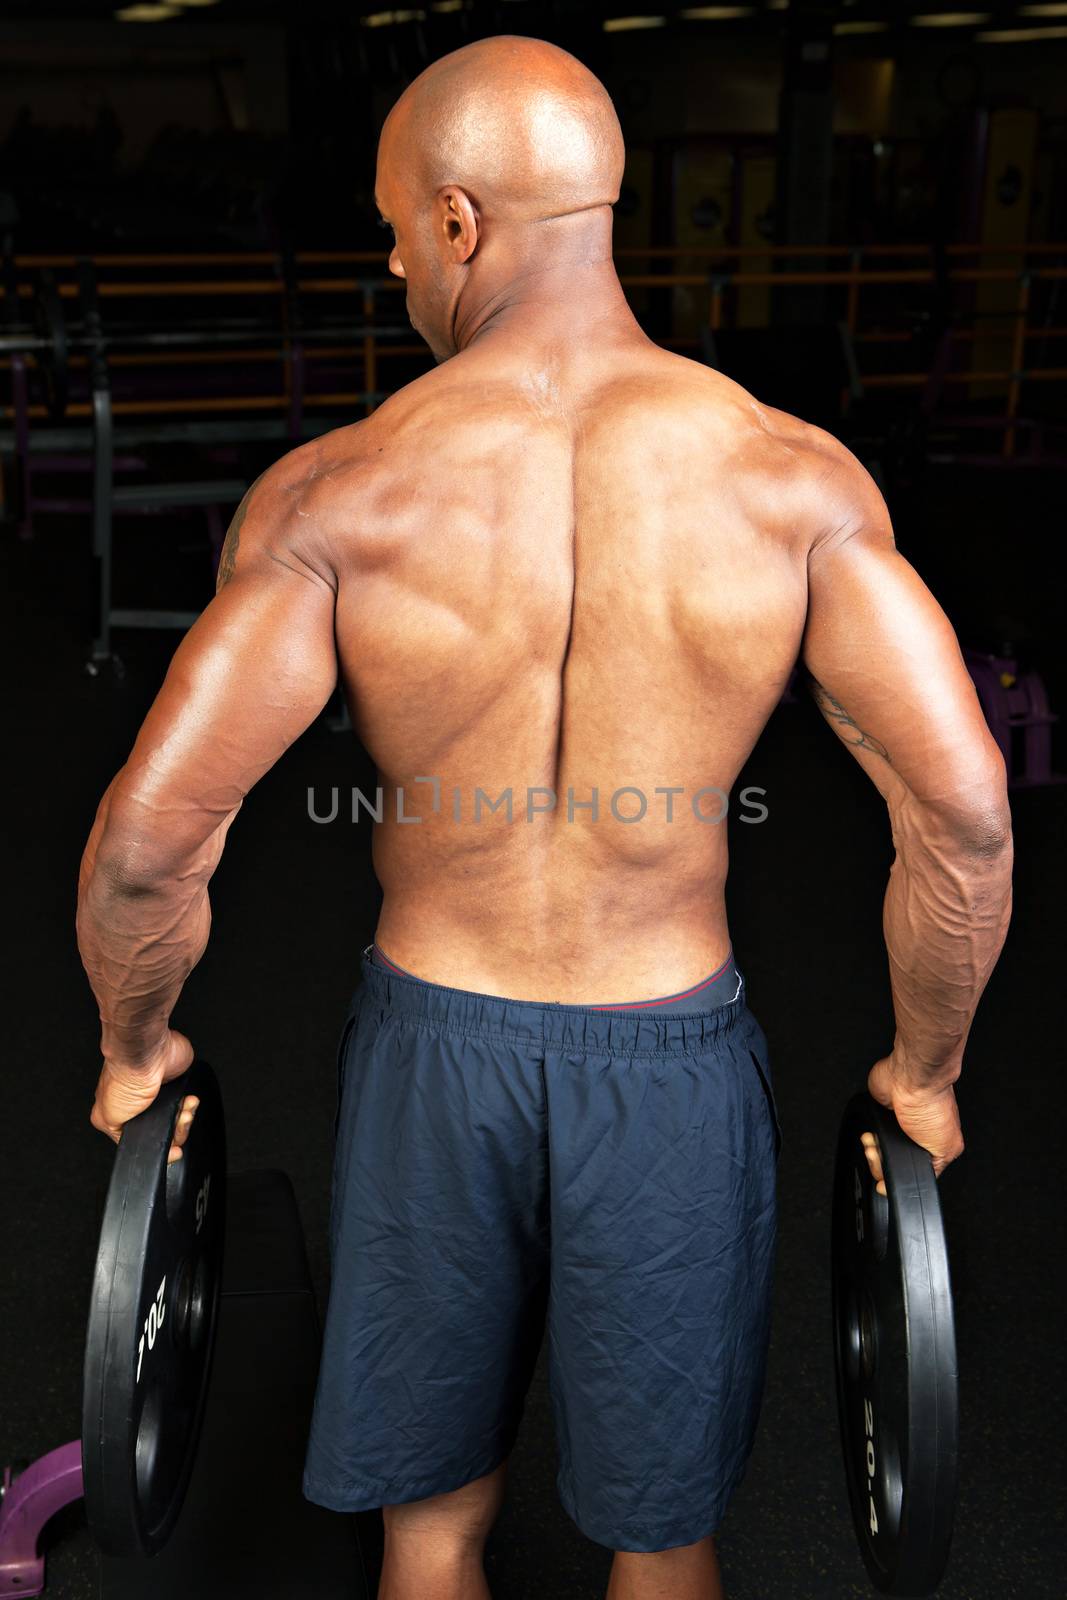 Muscular Back by graficallyminded